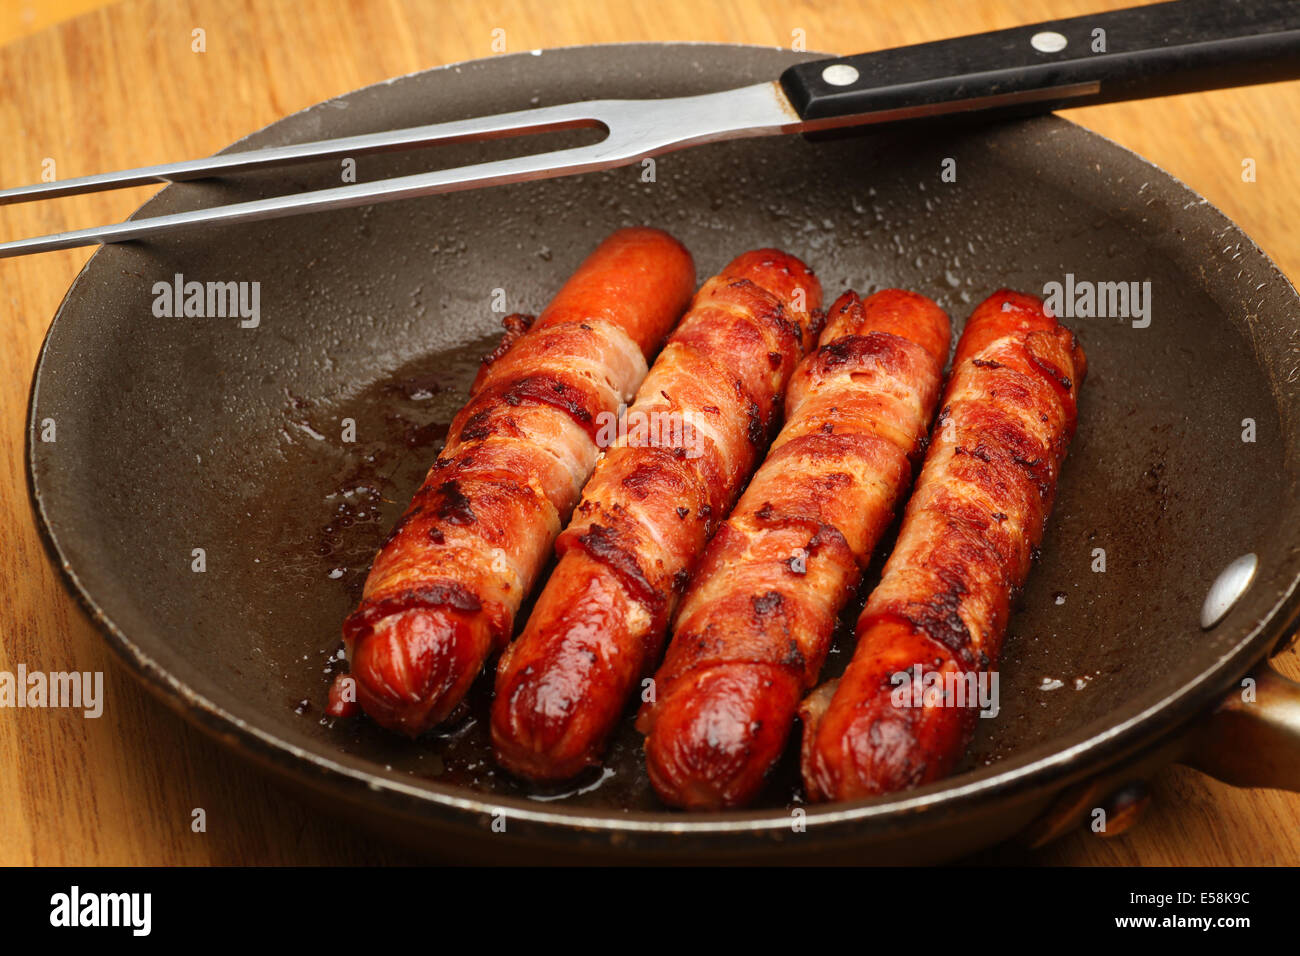 Hot dogs wrapped in bacon Stock Photo